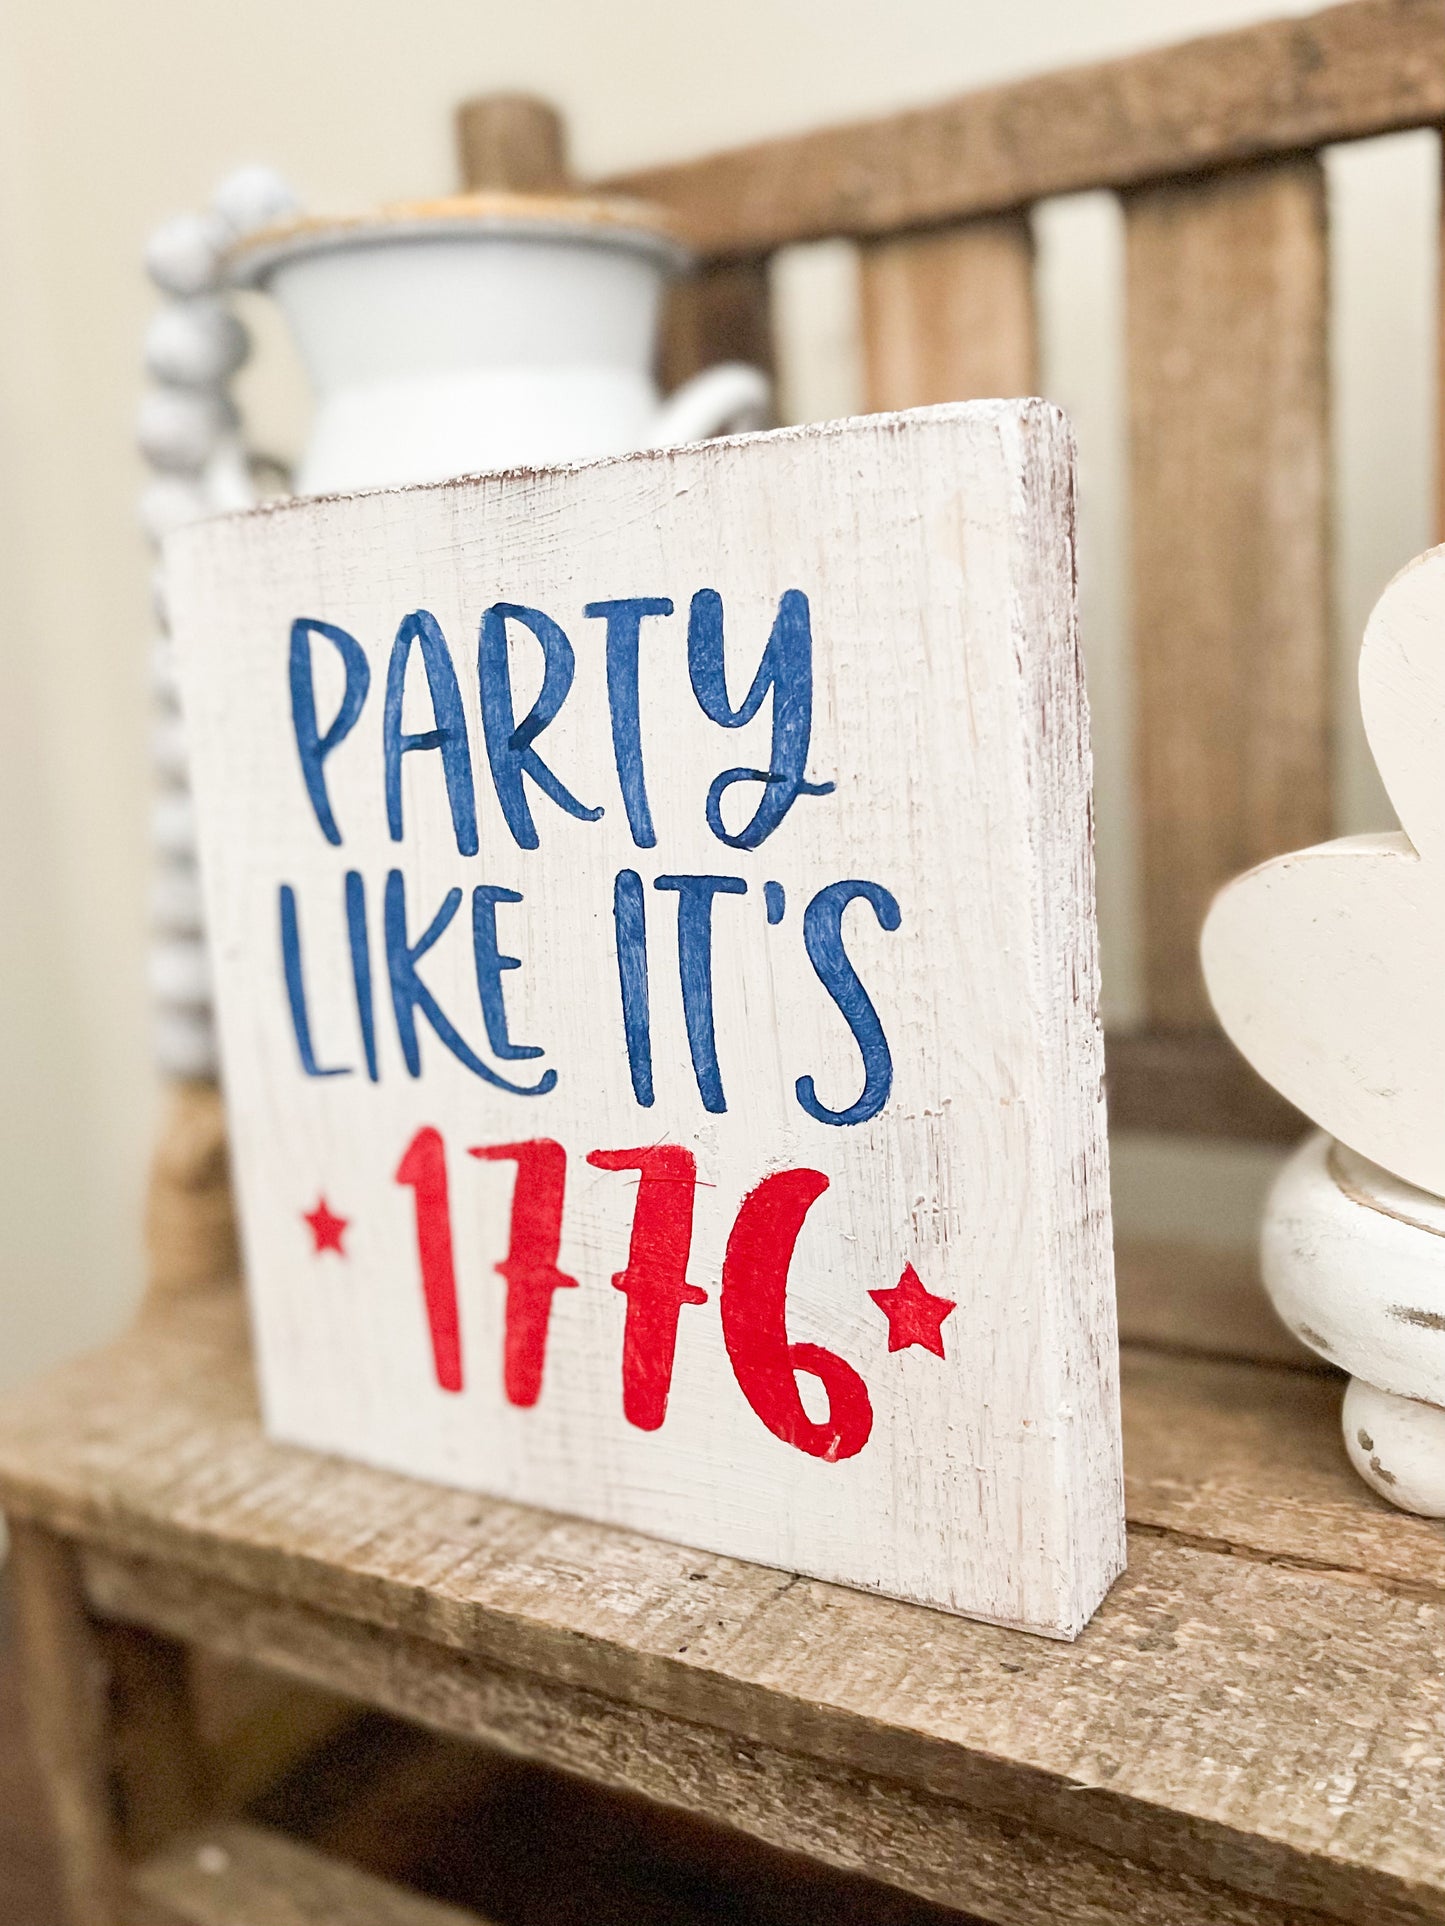 Party like it's 1776 sign